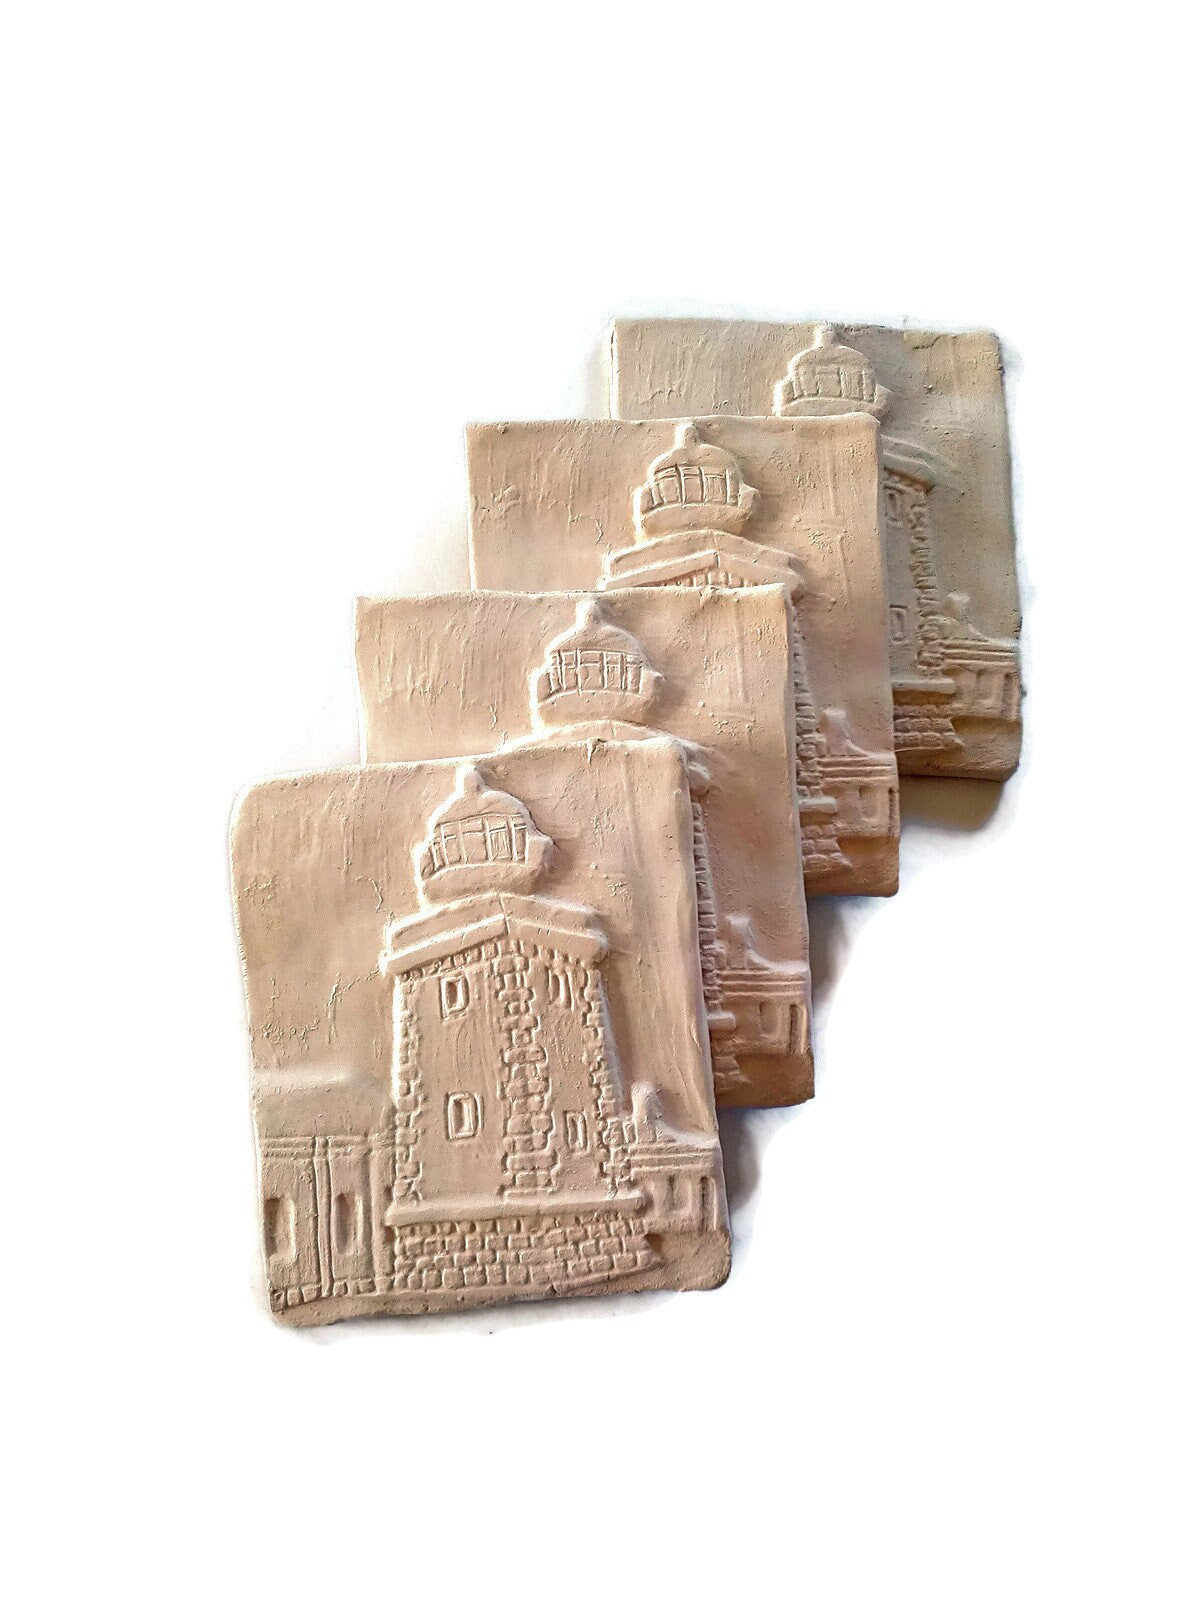 Lighthouse tile for crafts, unpainted ceramic bisque ready to paint, blank tile nautical, DIY gifts for mom, craft supplies for adults, best - Ceramica Ana Rafael